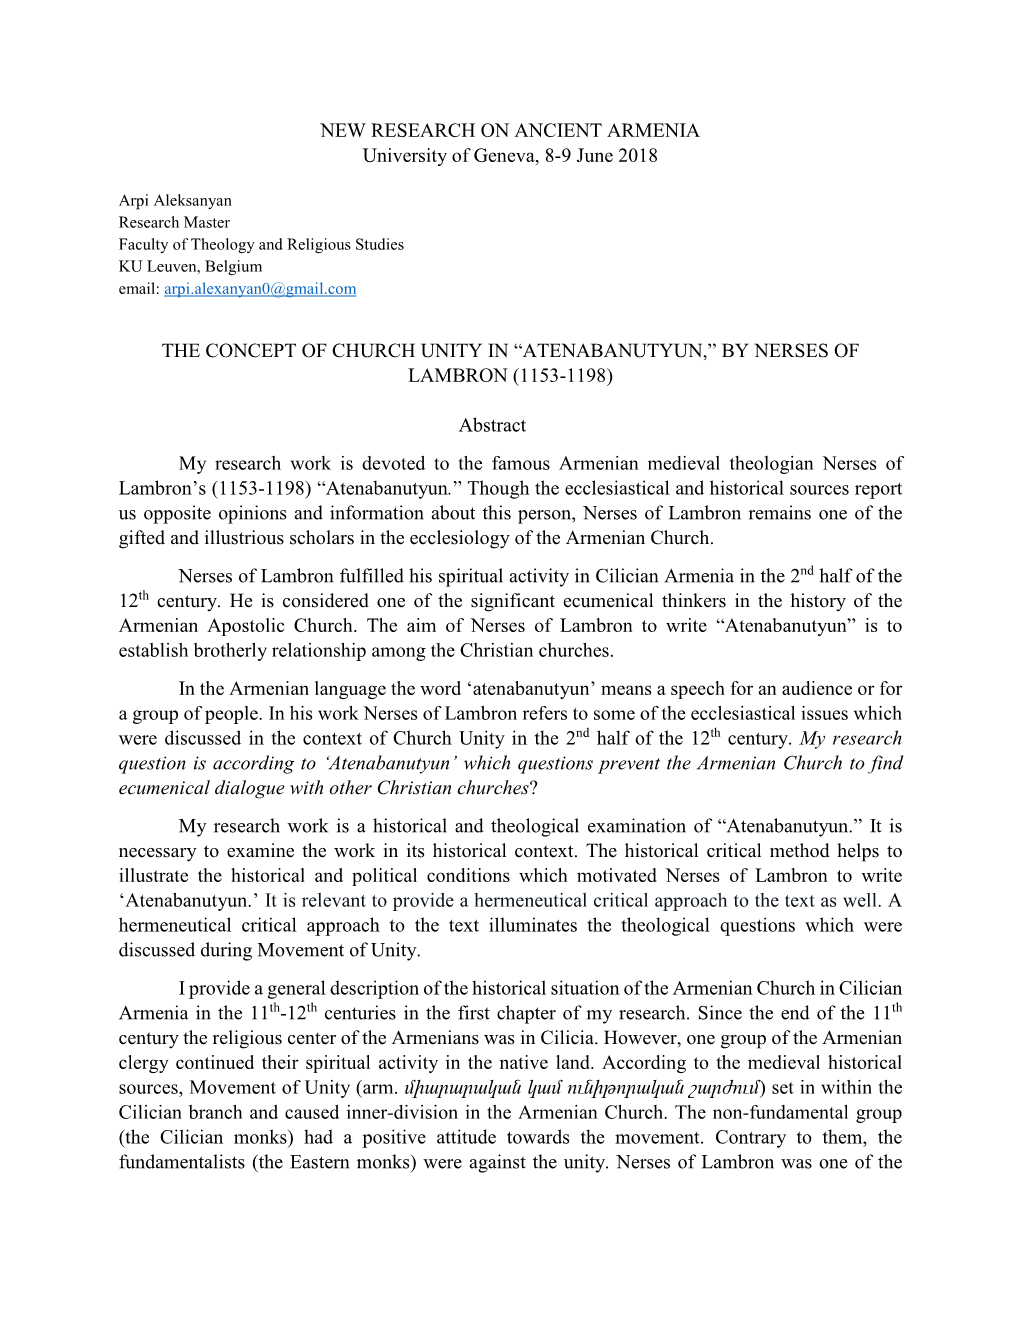 NEW RESEARCH on ANCIENT ARMENIA University of Geneva, 8-9 June 2018 the CONCEPT of CHURCH UNITY in “ATENABANUTYUN,” by NERS